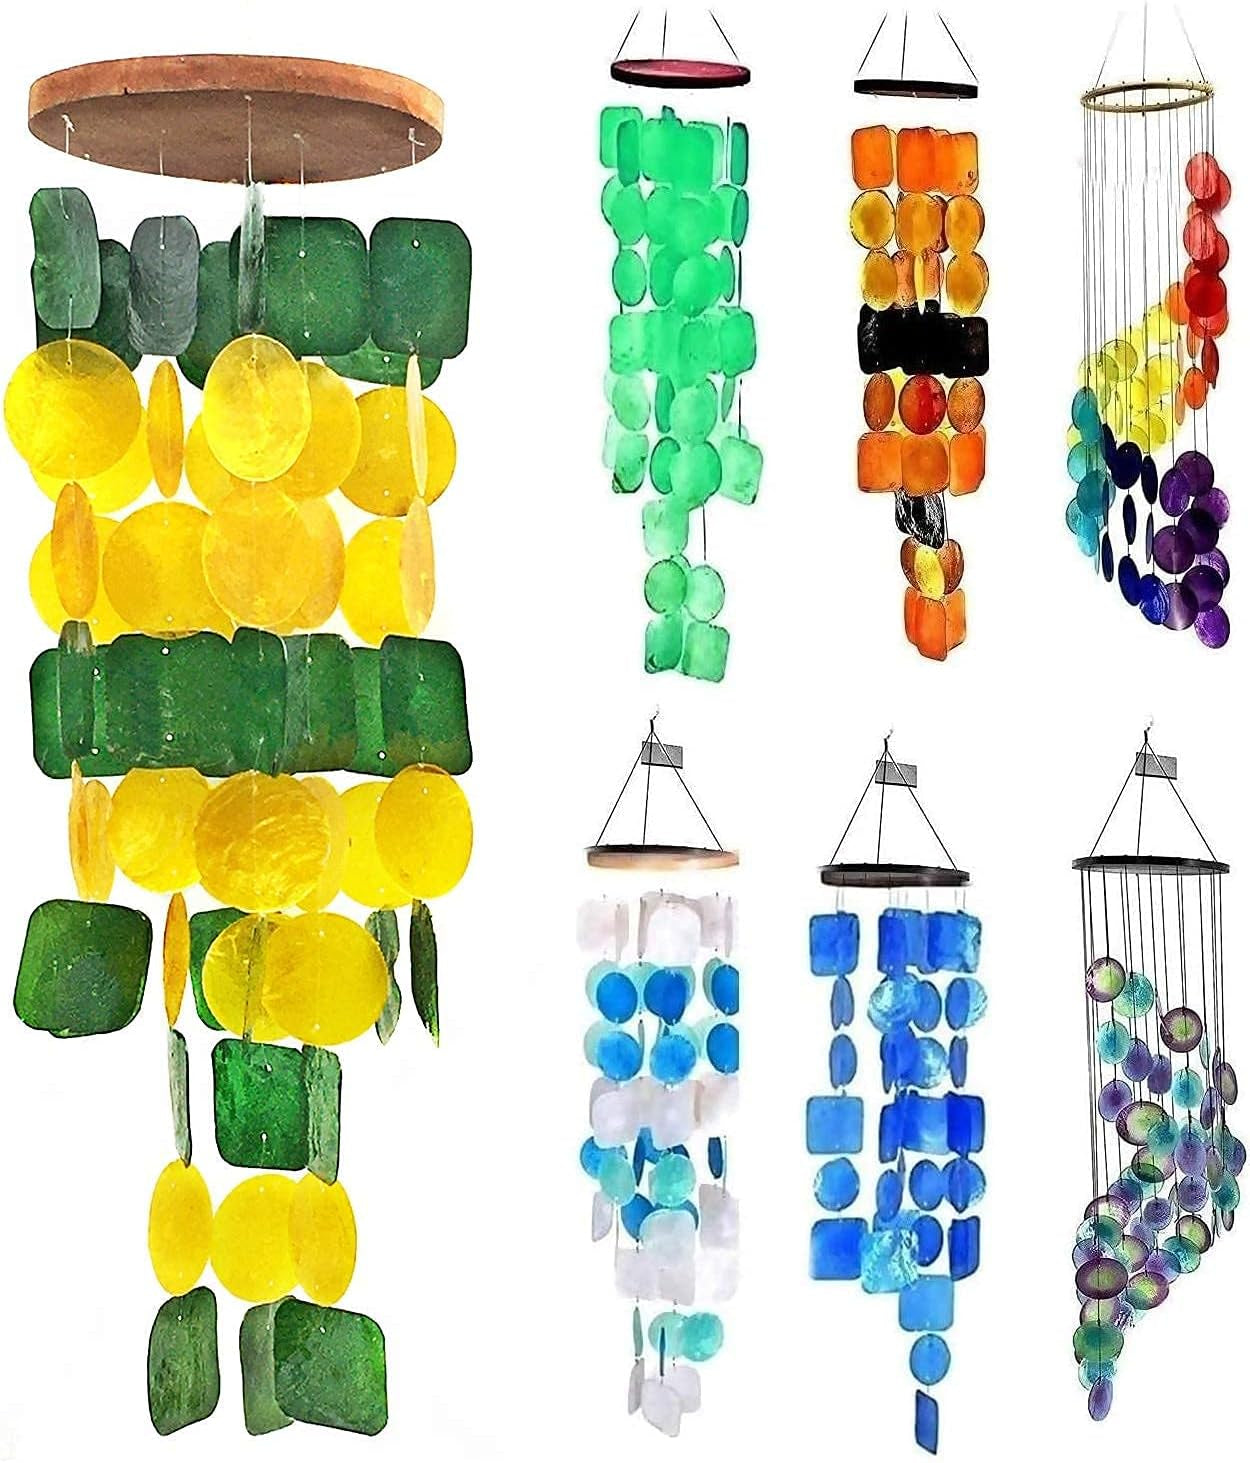 24898 Capiz Wind Chimes Sea Glass Shells Large 27 Inch outside Windchimes Home Decor Outdoor Garden Patio Yard Lawn Unique Gifts for Mom Grandma Woman Sympathy Memorial Remembrance